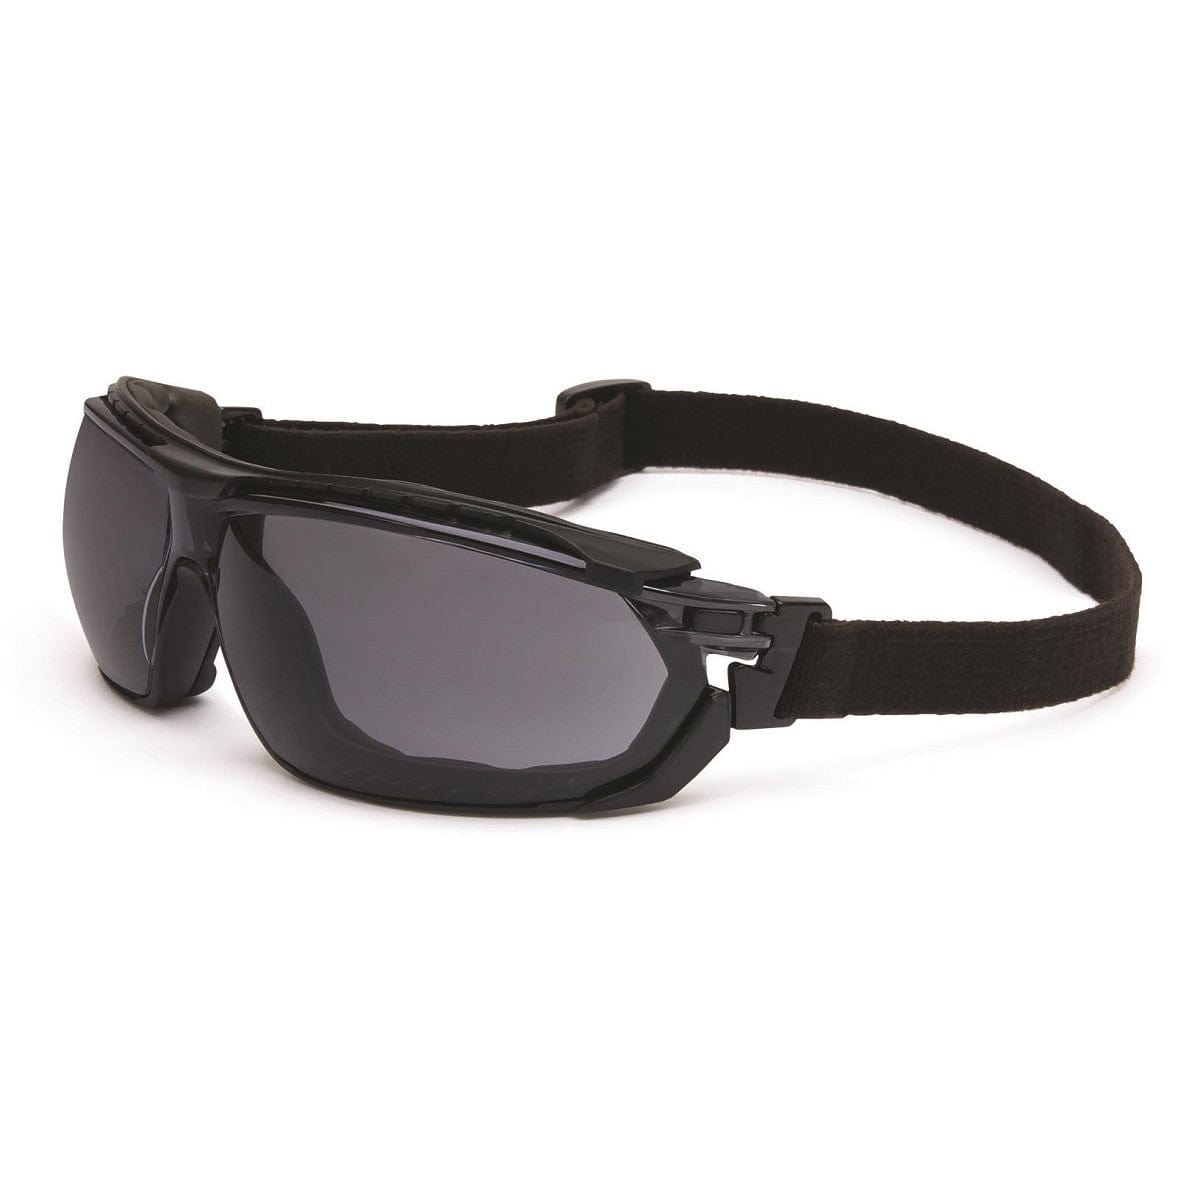 Uvex Tirade Safety Glasses Gray Anti-Fog Lens with Goggle Strap Installed